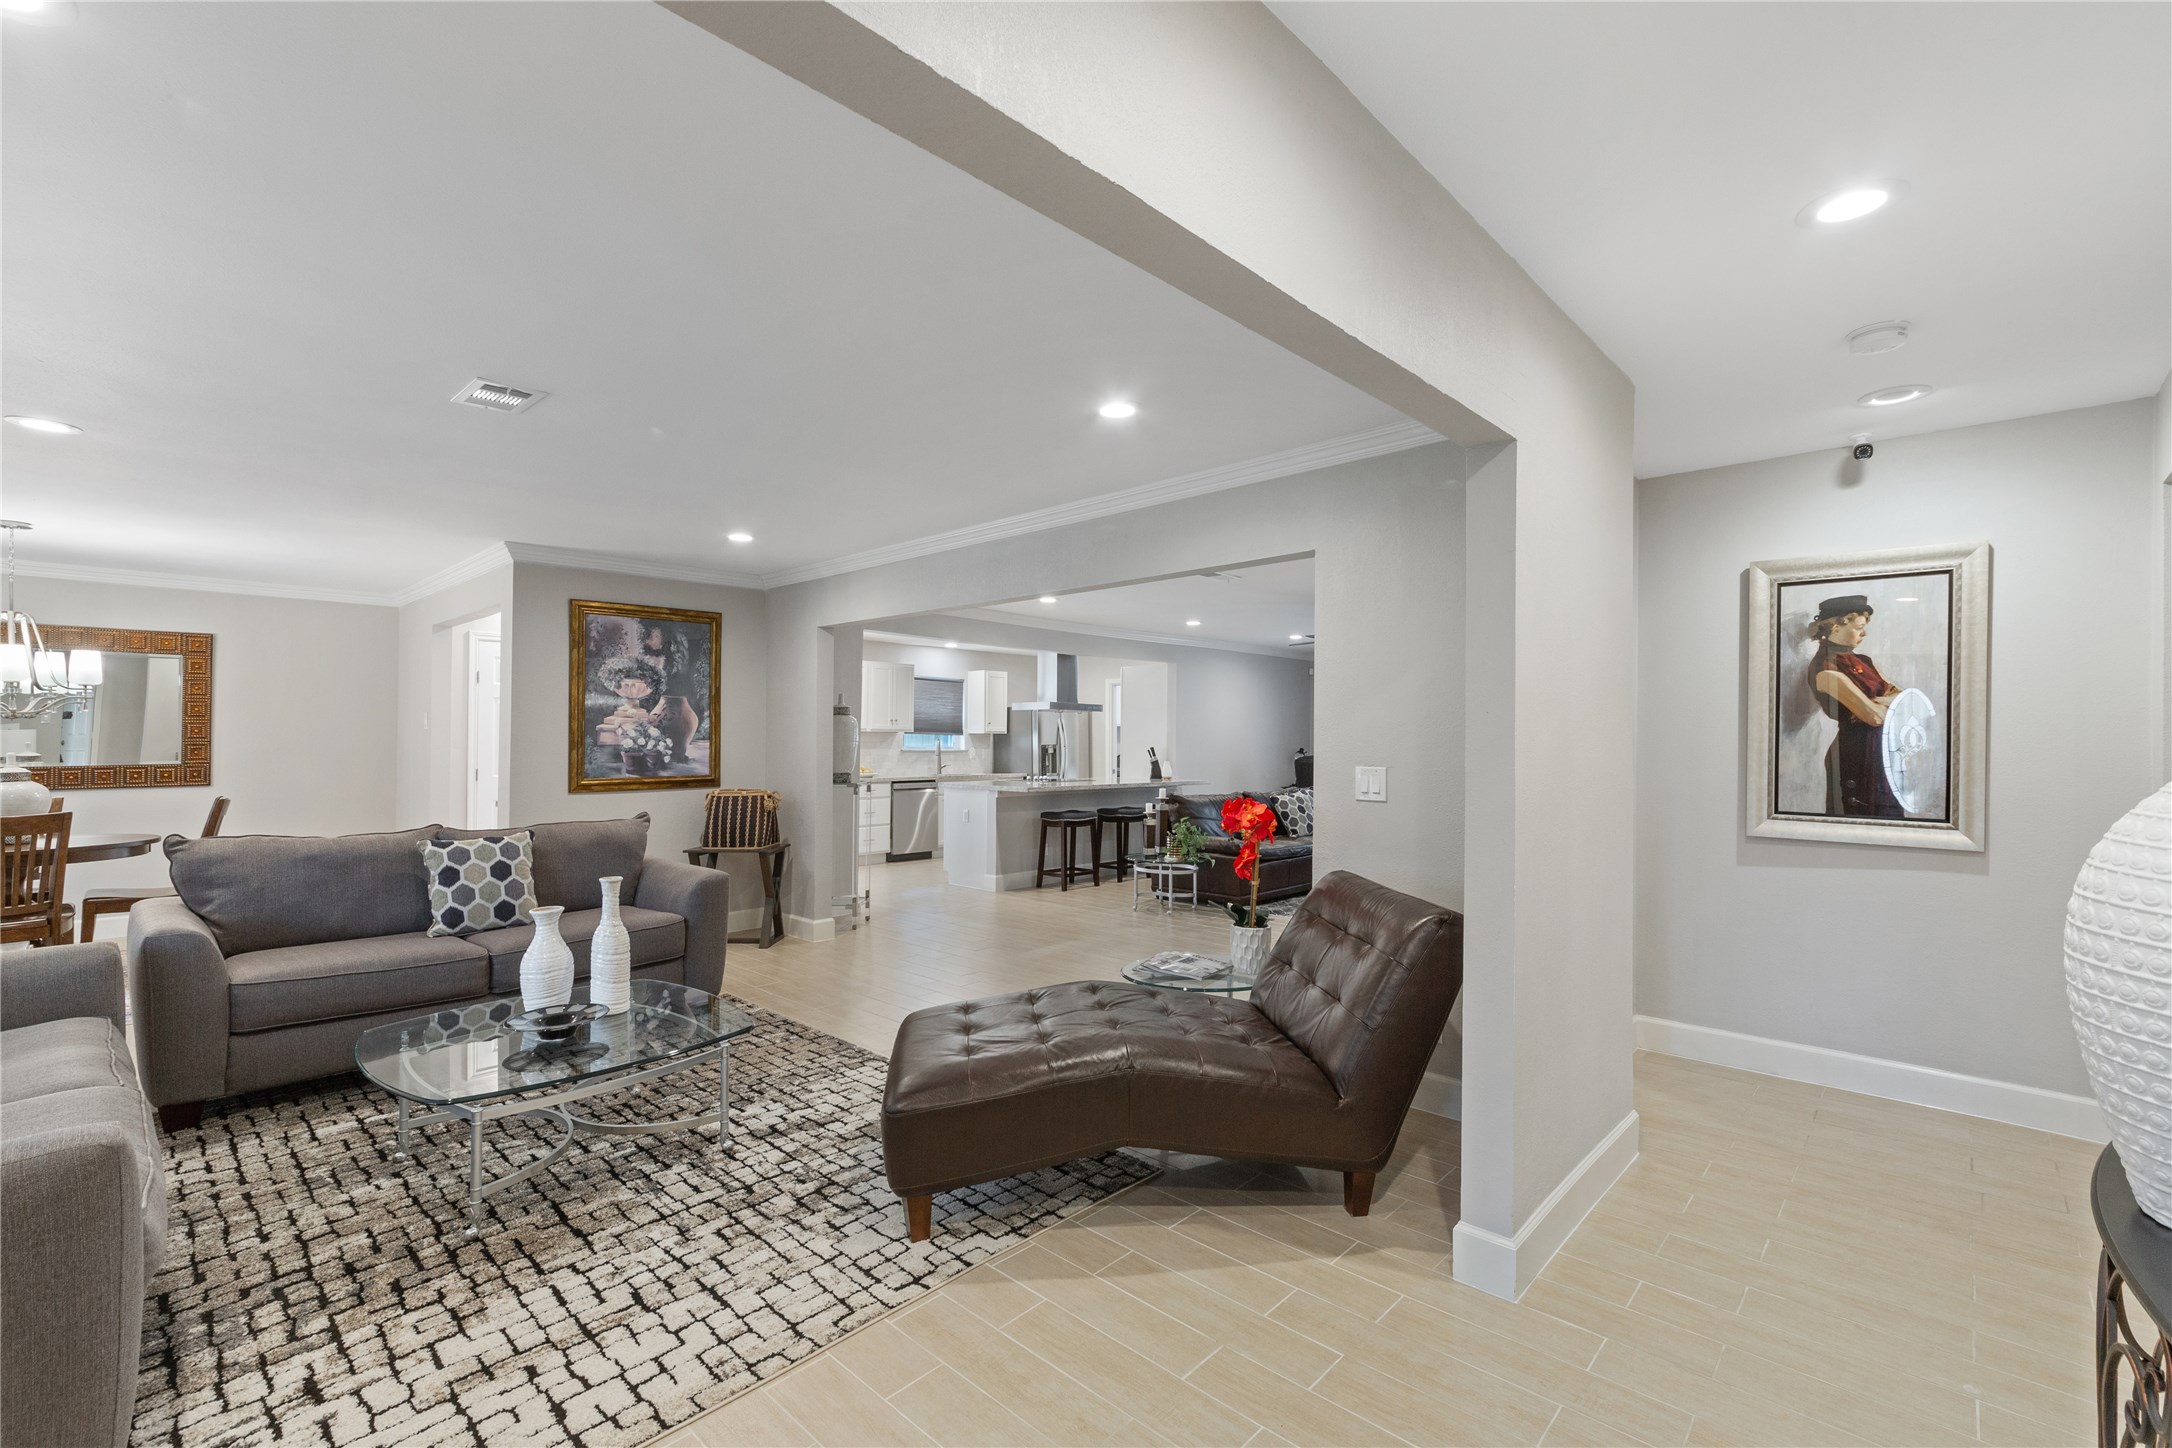 Just one step in and you will fall in love with the brightness of this open floor plan.  The formal living room greets you upon entry.